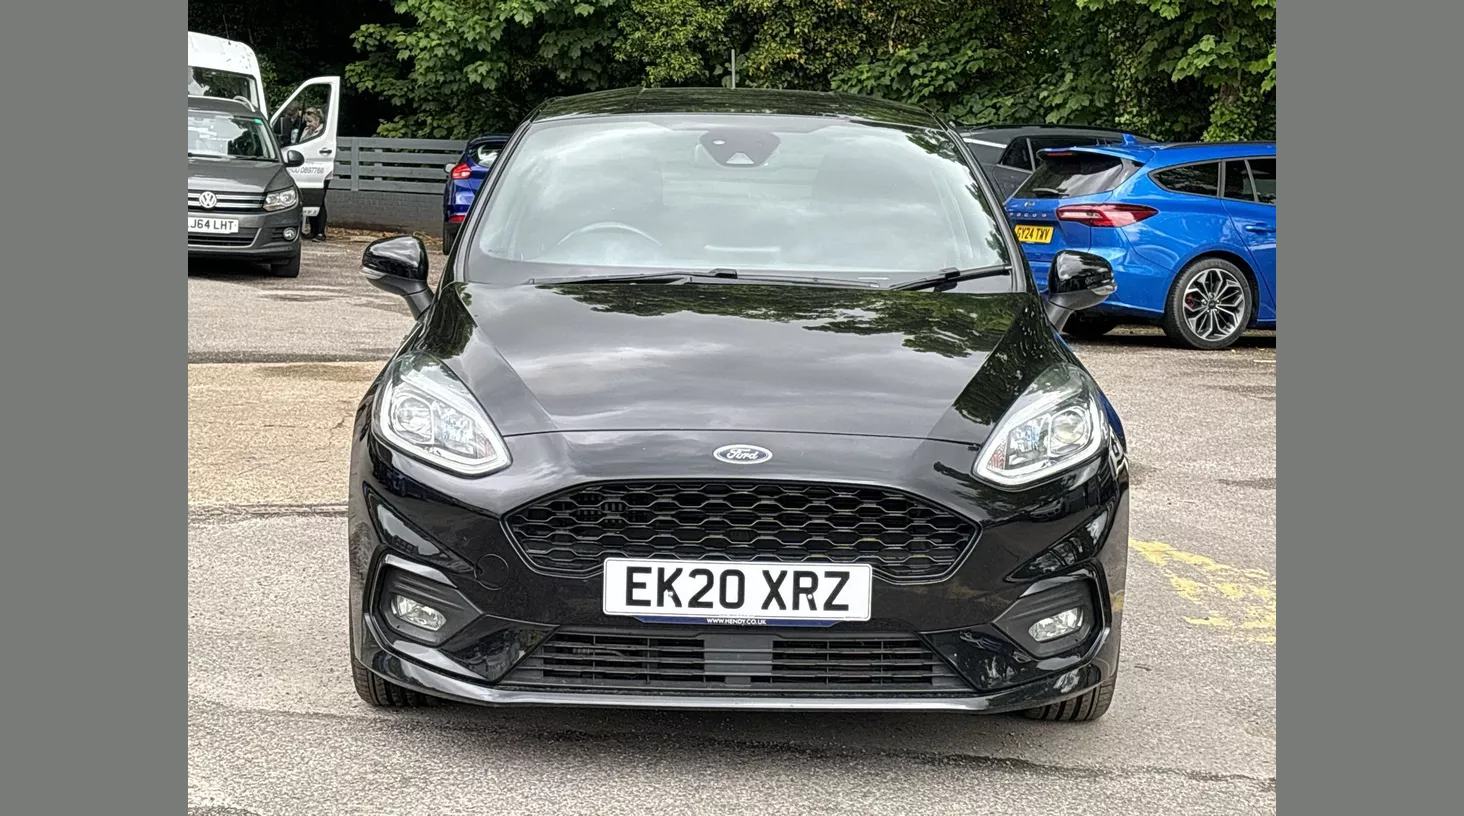 Ford Fiesta 1.0 EcoBoost 125 ST-Line Edition 5dr